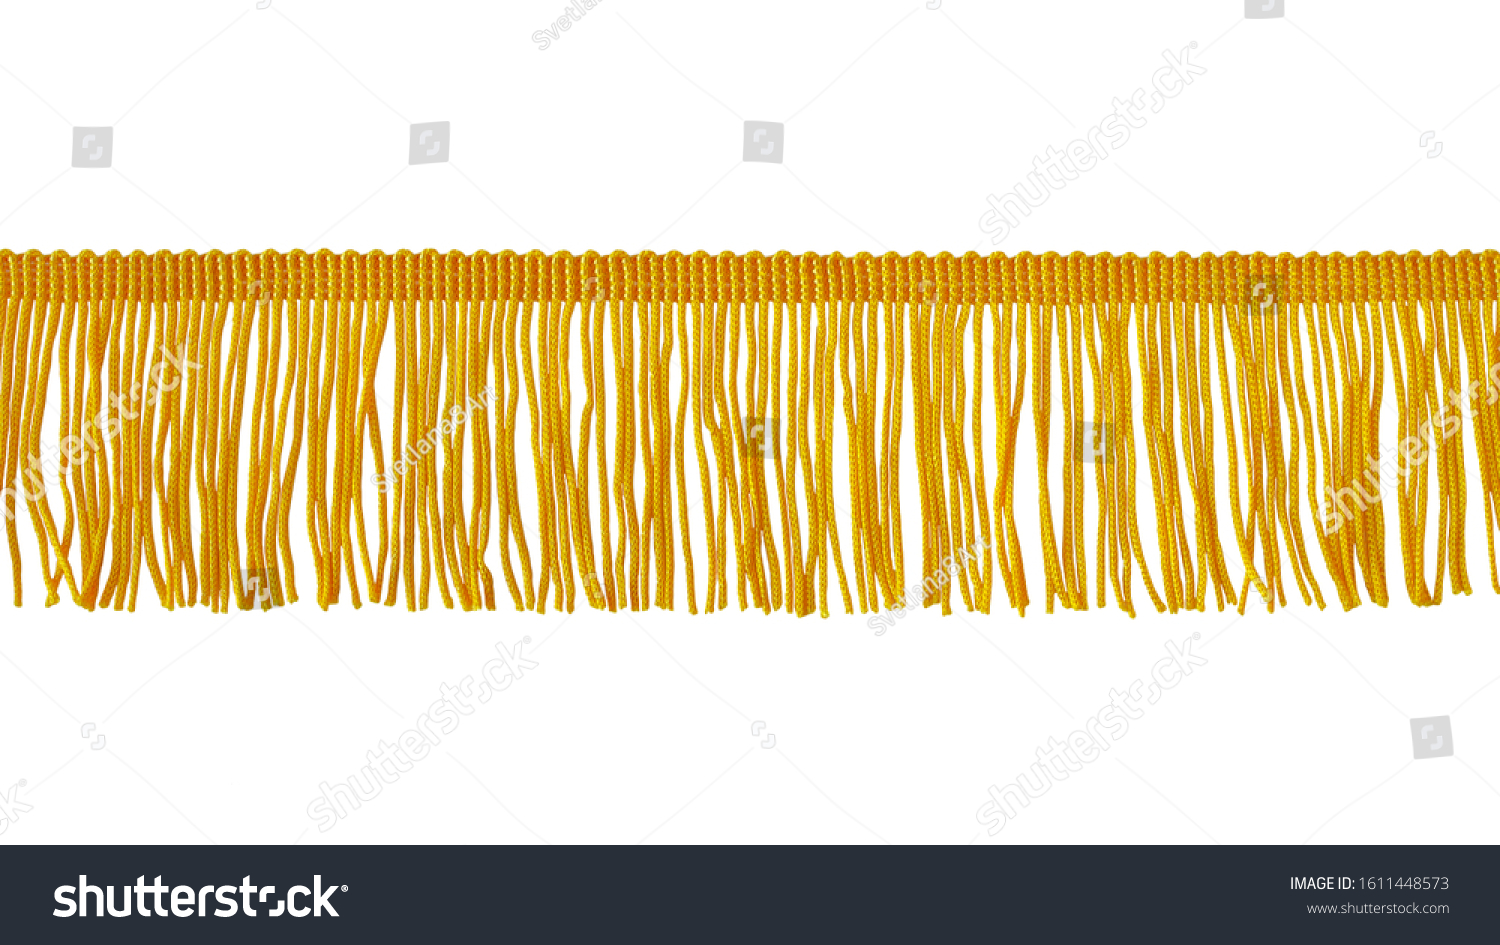 The fringe is yellow. Isolated on a white background. Decor, design, decoration, texture. #1611448573